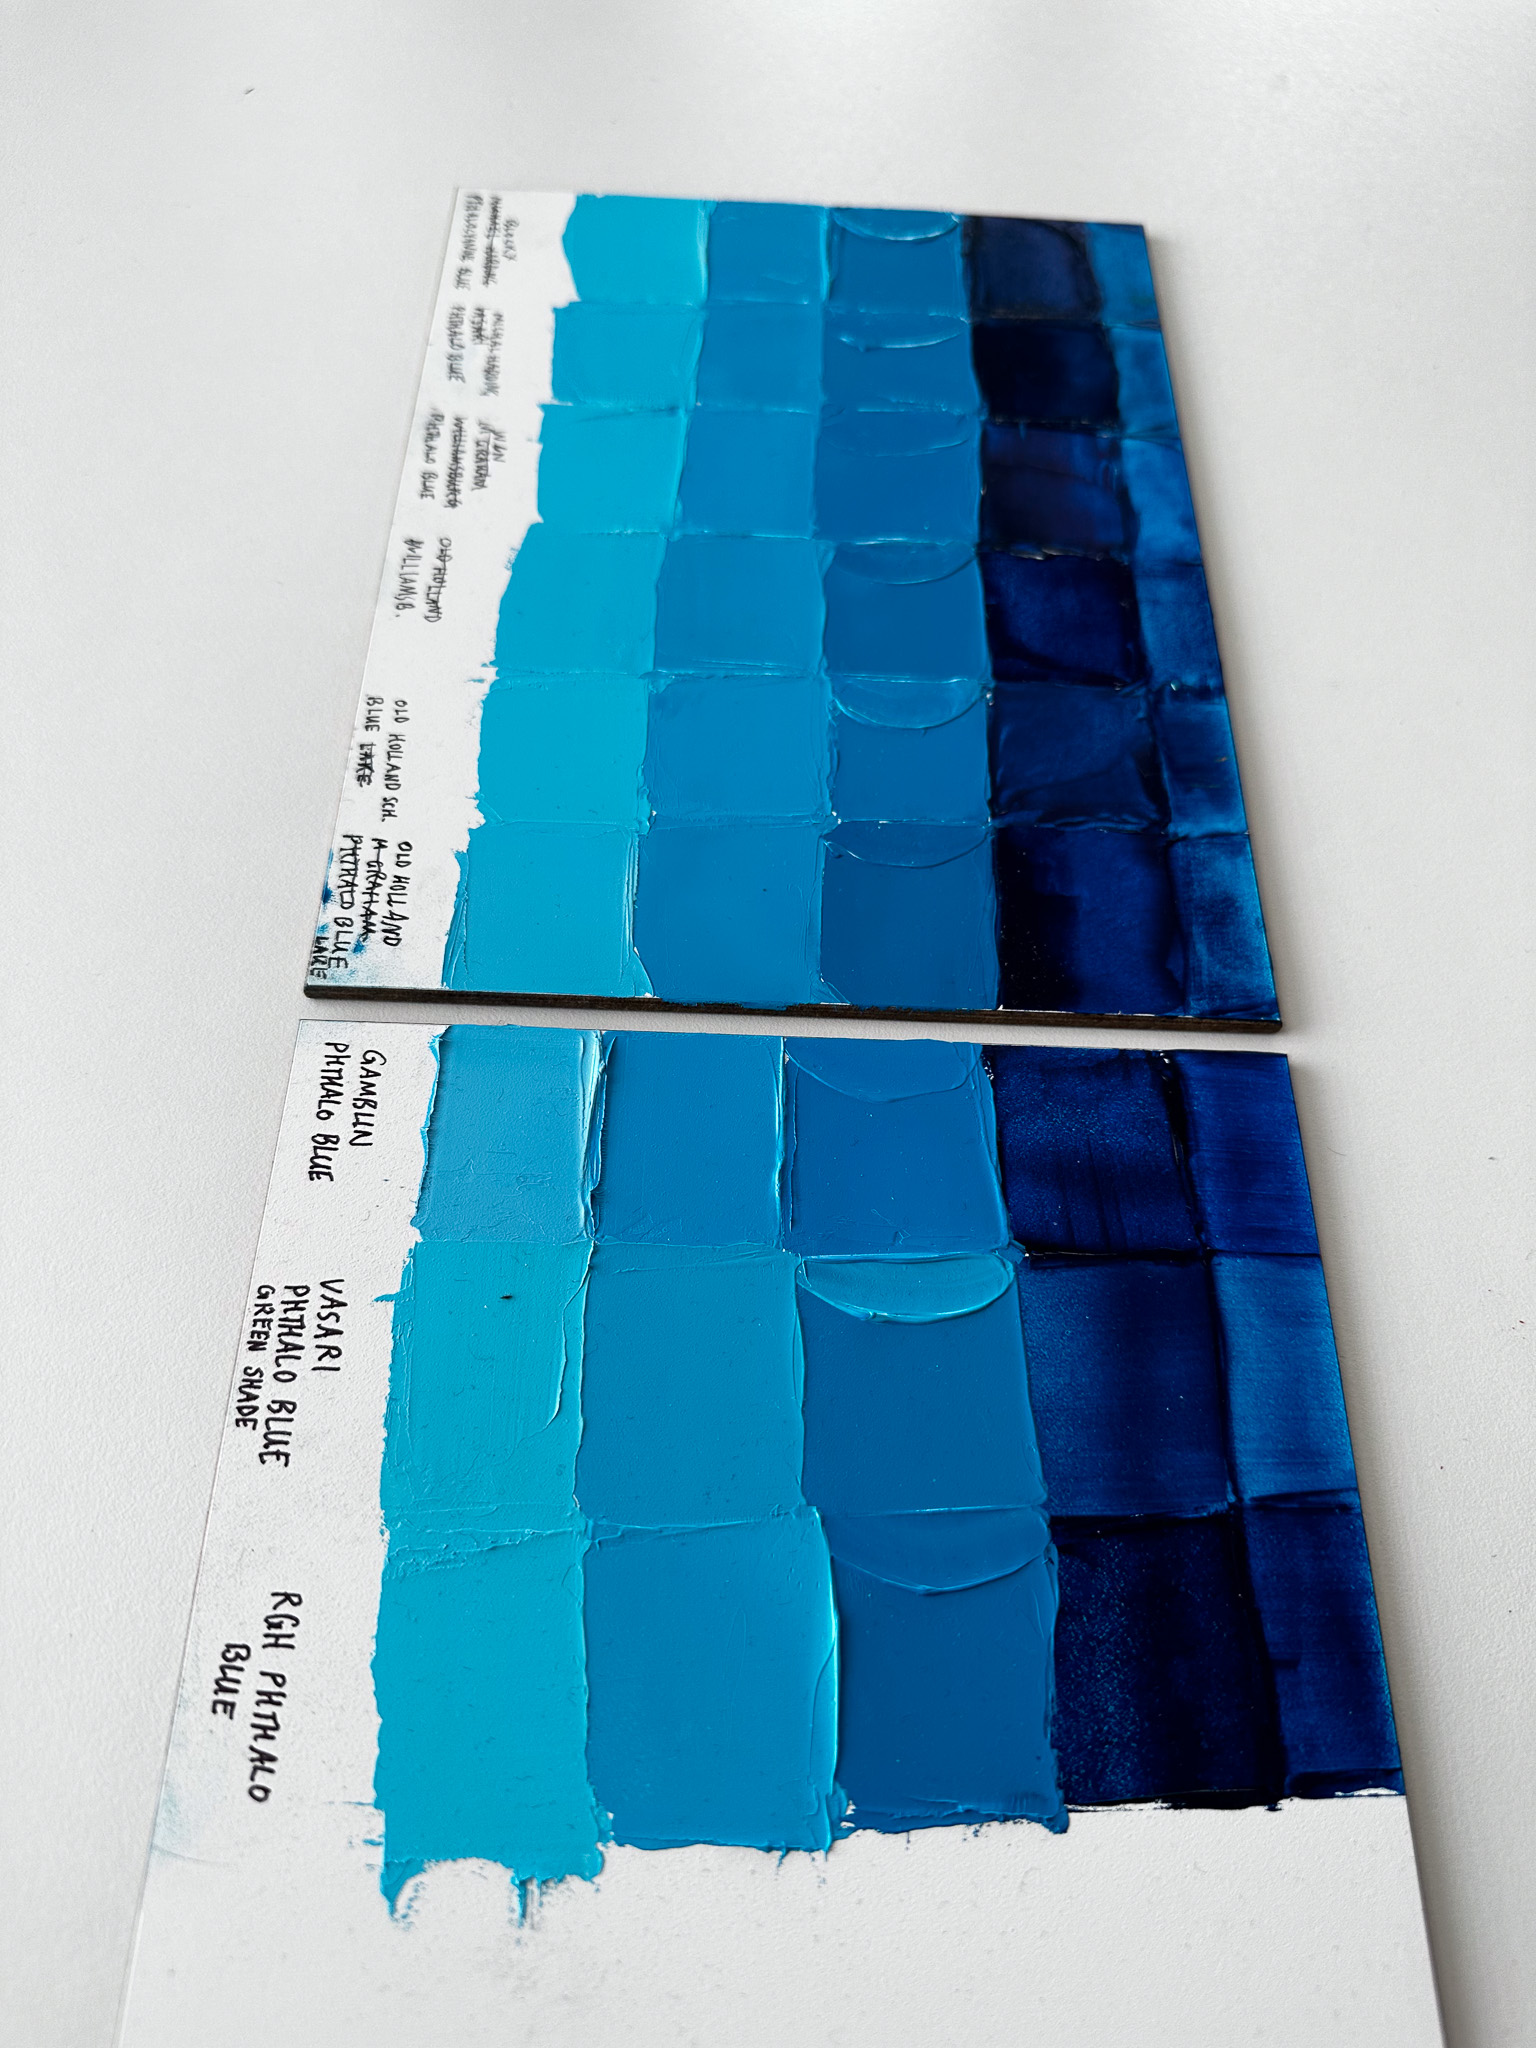 Bright blue paint swatches comparing Phthalo Blue Green Shade in oil paints. Paints shown are by Old Holland, Williamsburg and other paintmakers.